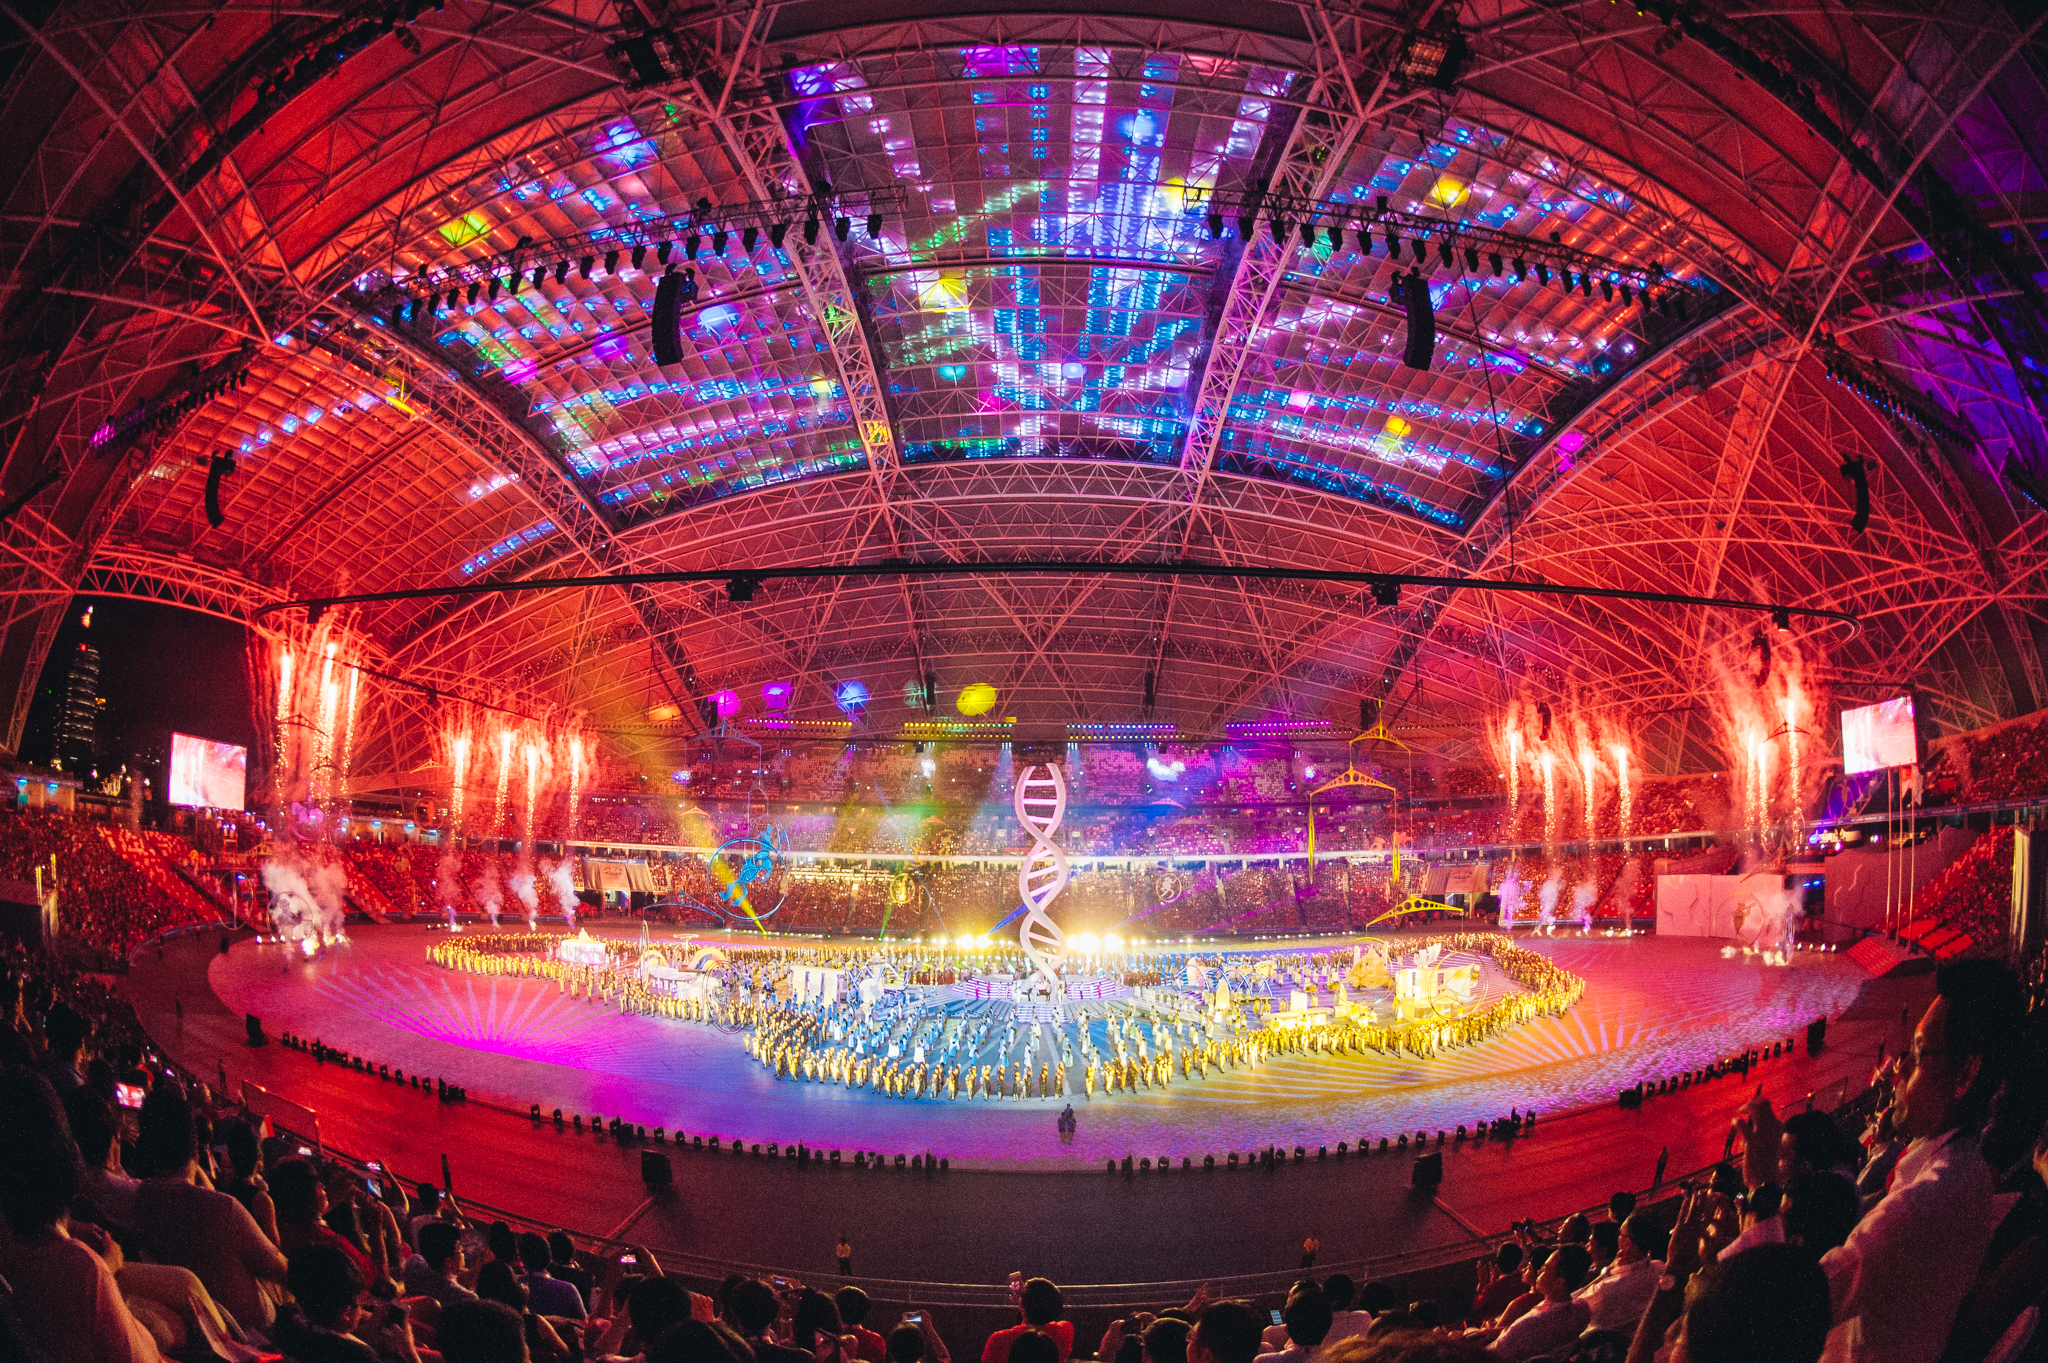 28th Southeast Asian (SEA) Games Opening Ceremony 2015